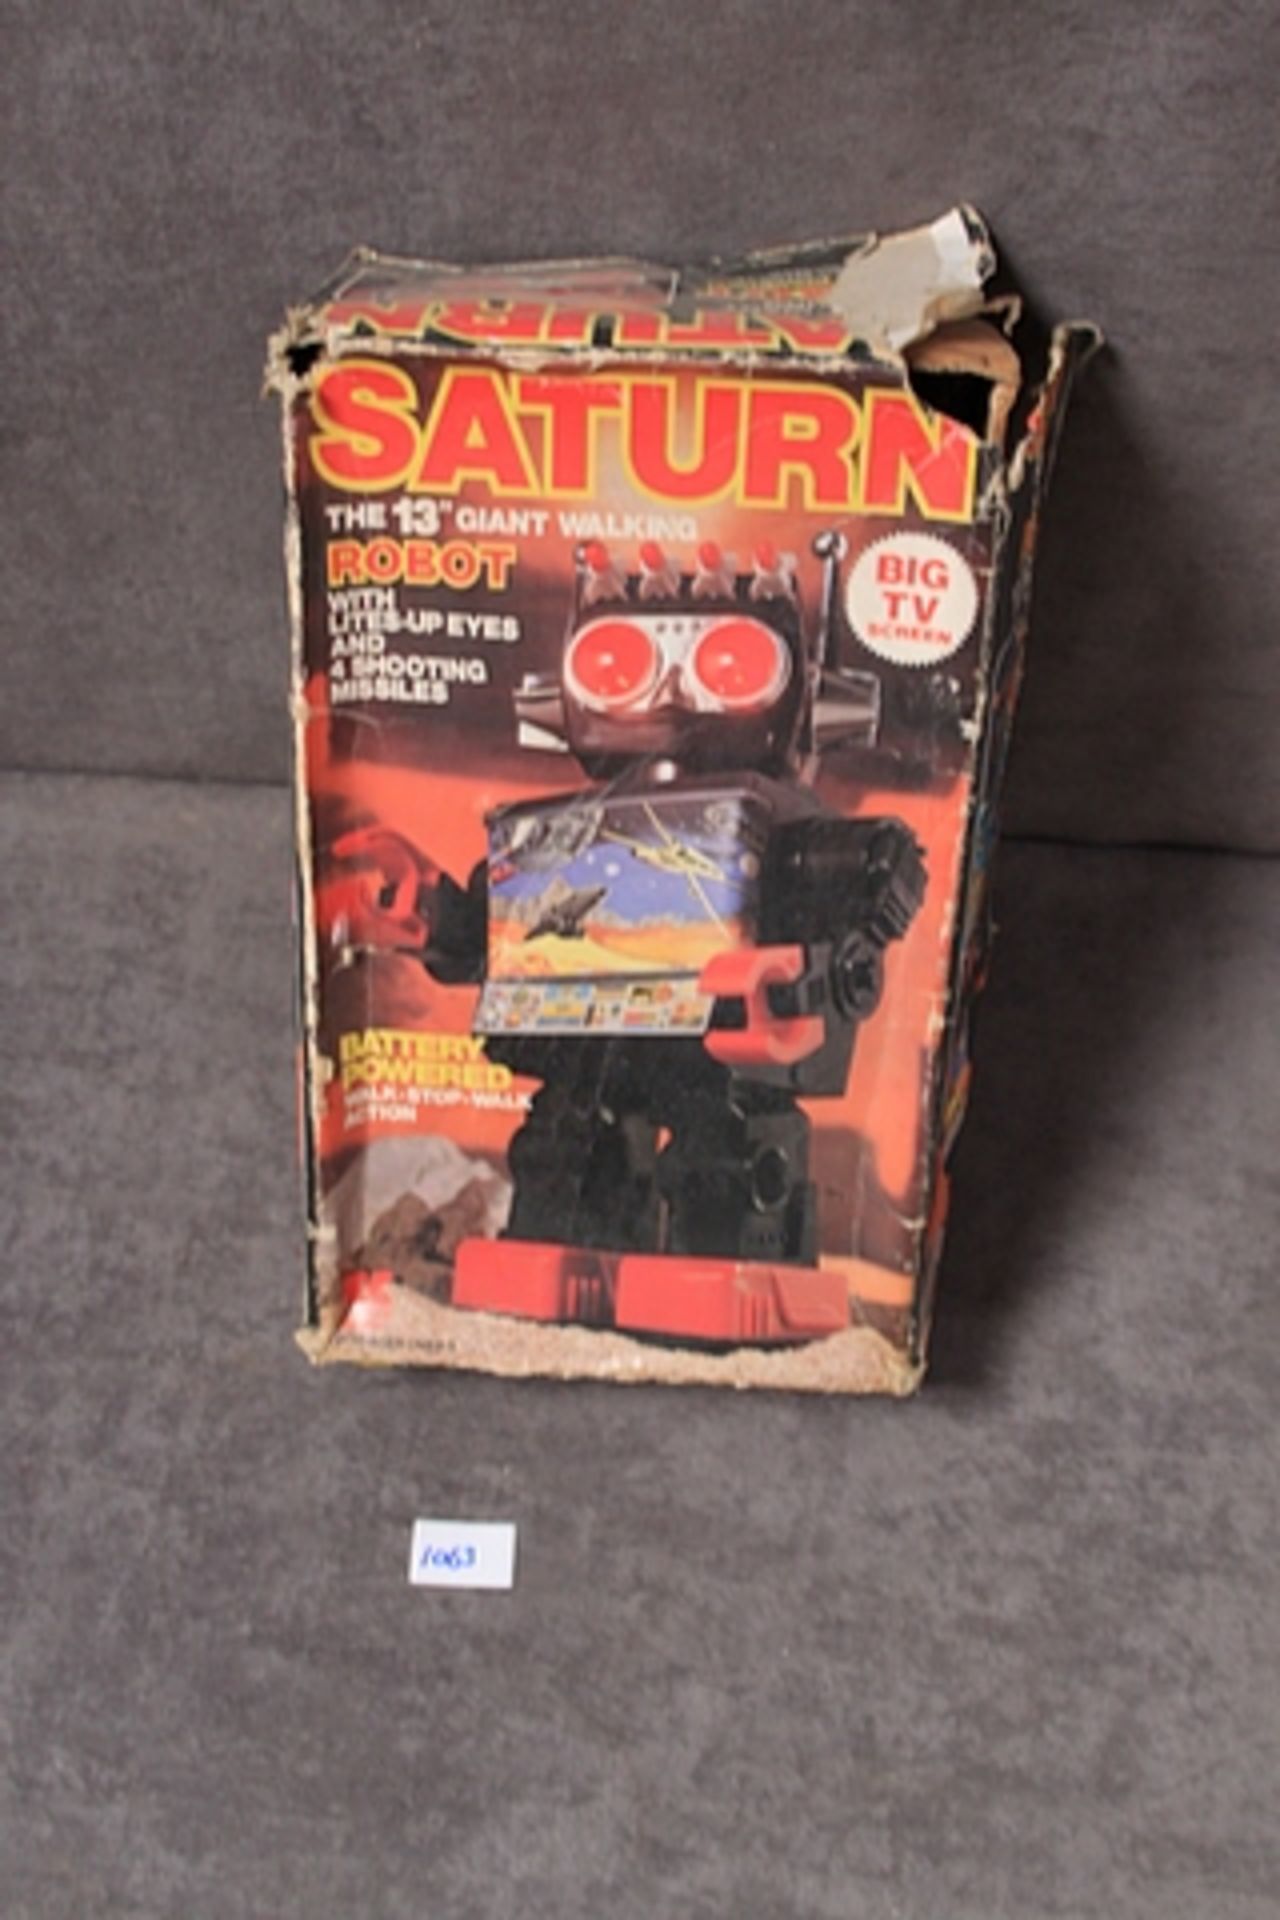 Kamco (Hong Kong) #1981 Saturn 13" Robot in a poor box (missiles missing) - Image 2 of 4